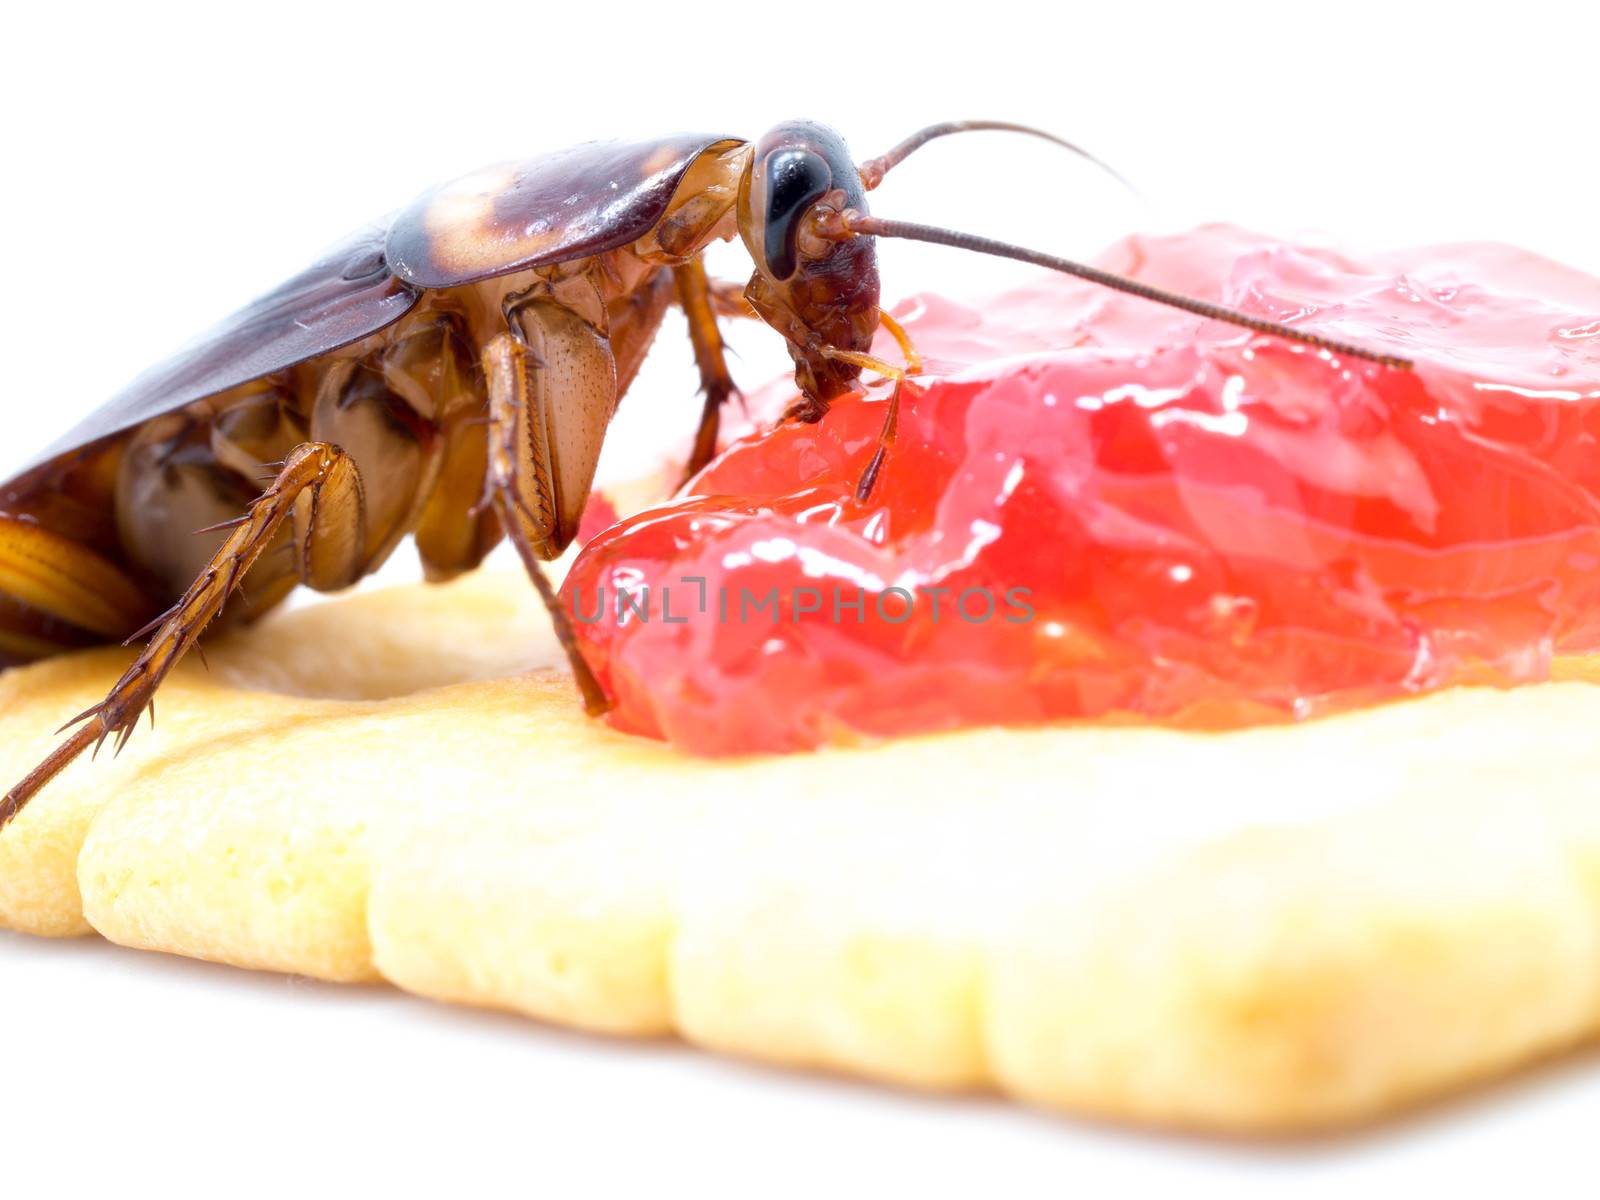 Close up cockroach on the whole wheat bread with jam. Cockroaches are carriers of the disease.